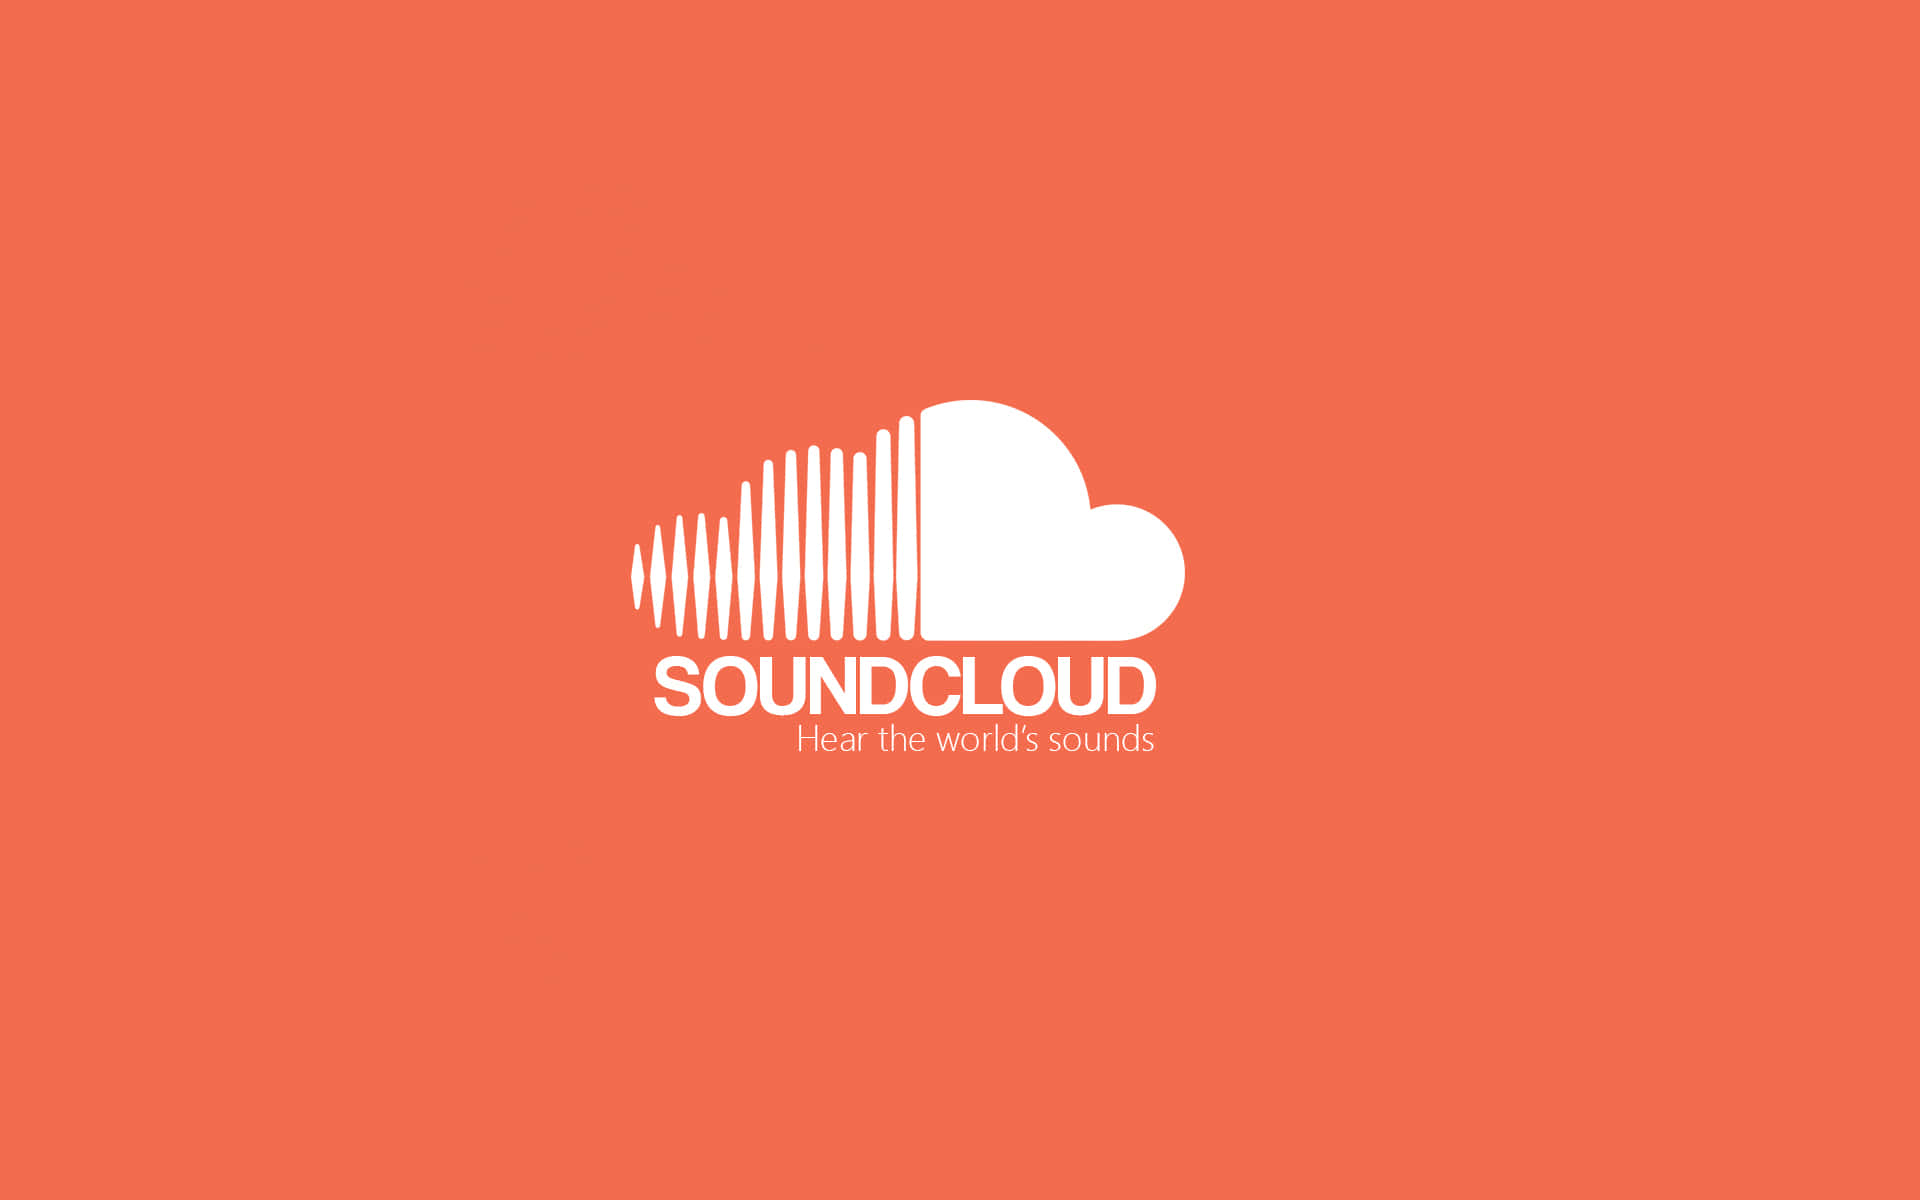 Discover Music and Audio on SoundCloud